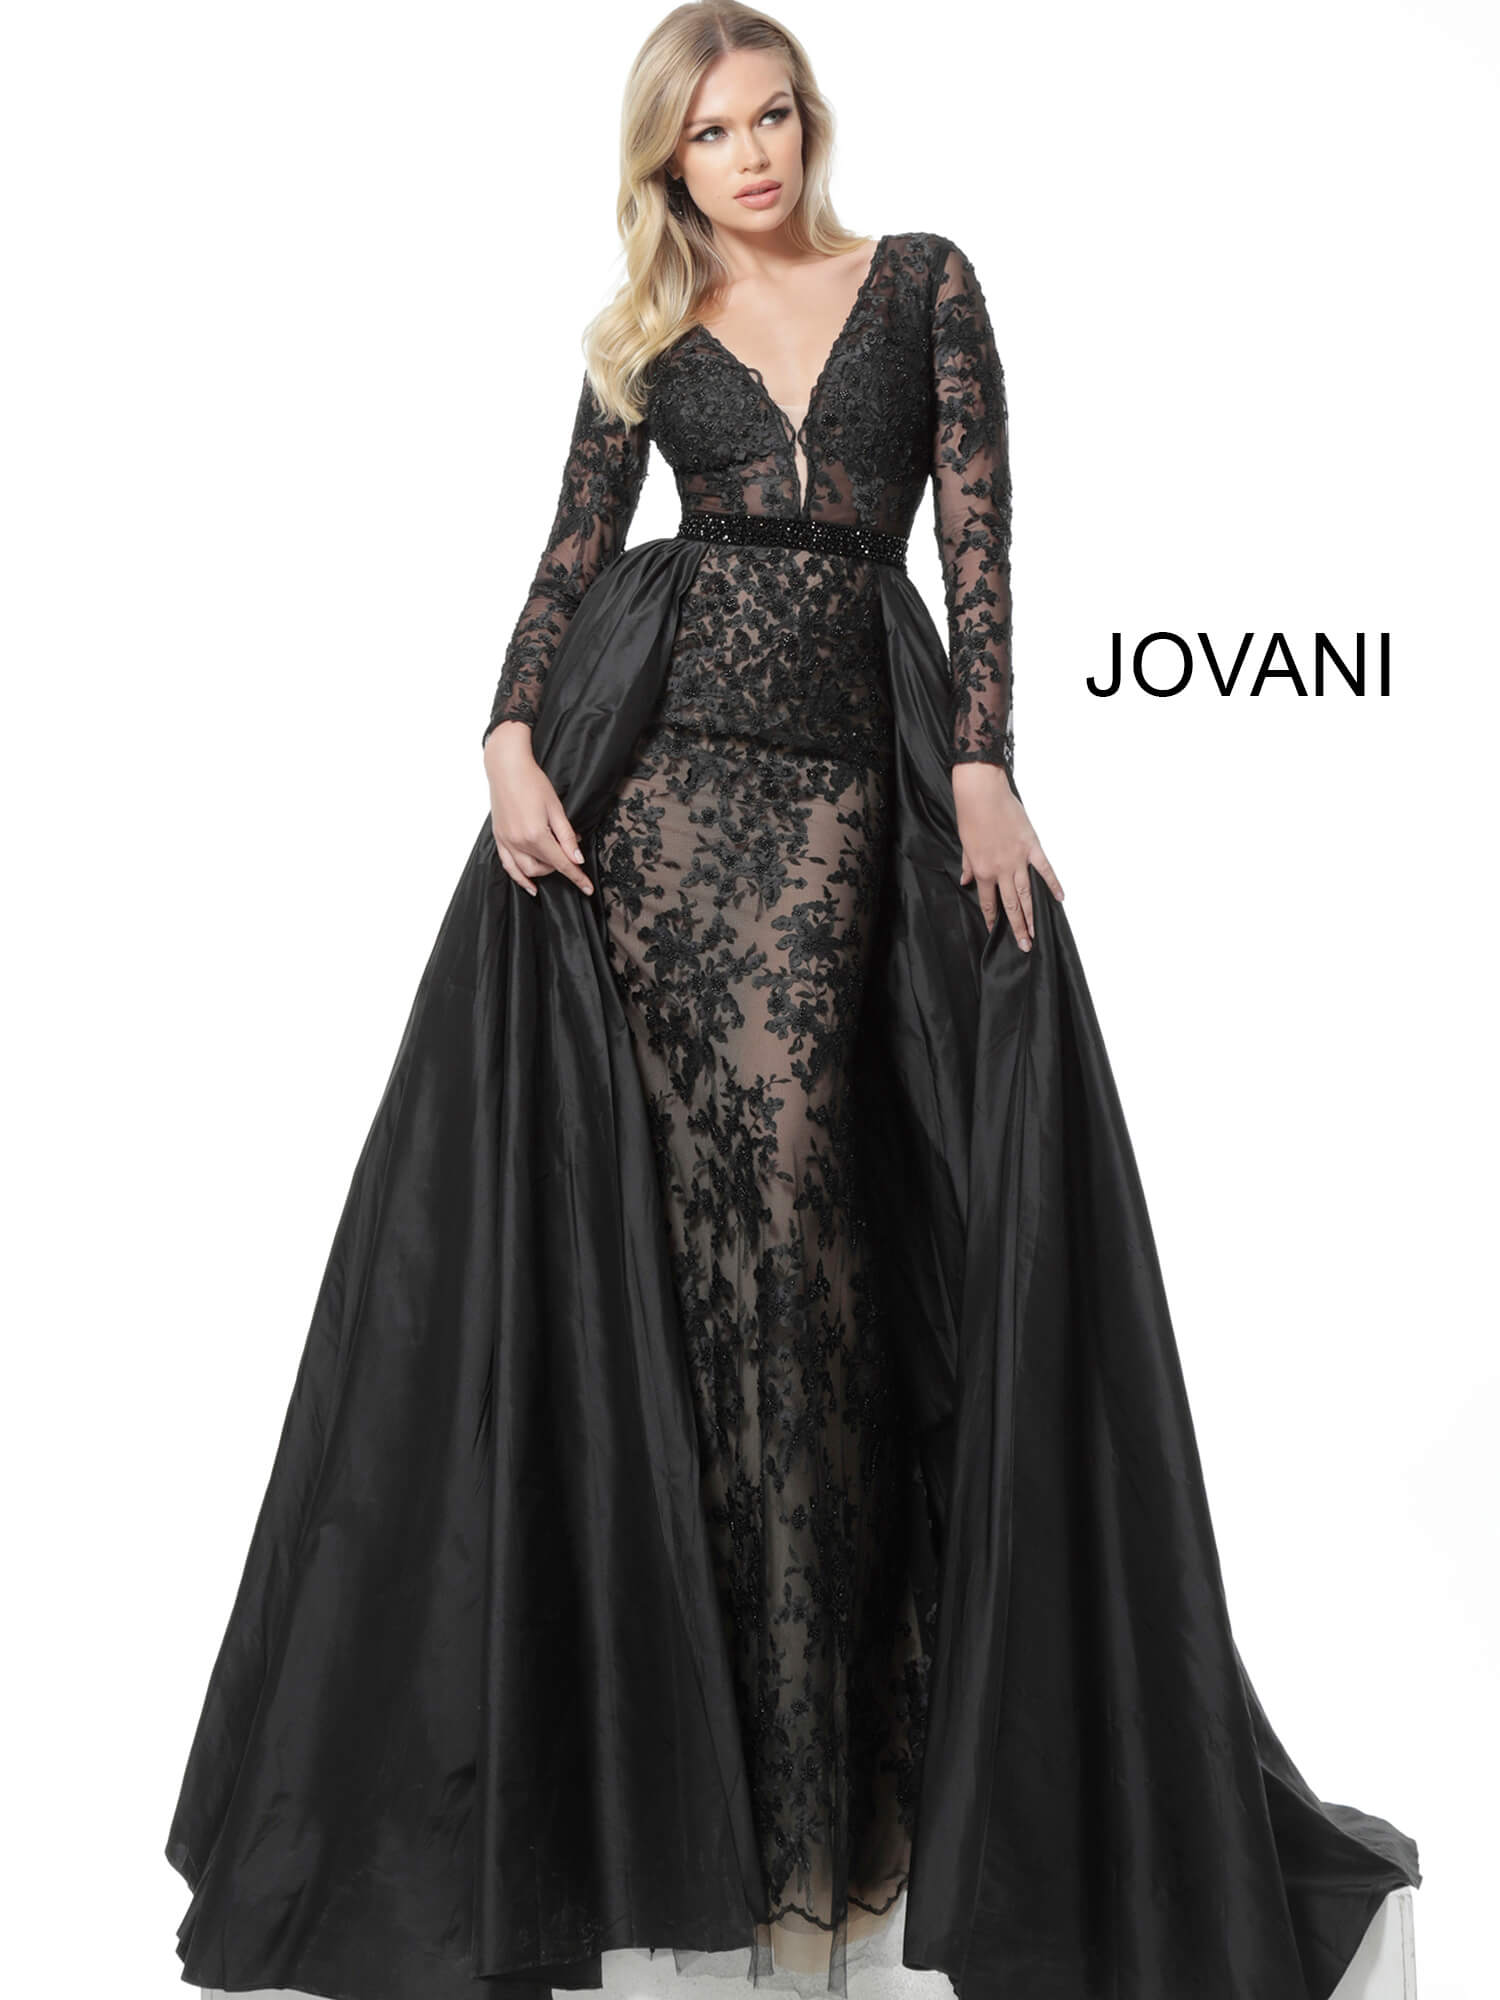 Jovani 67466 | Black Plunging Long Sleeve Evening Gown